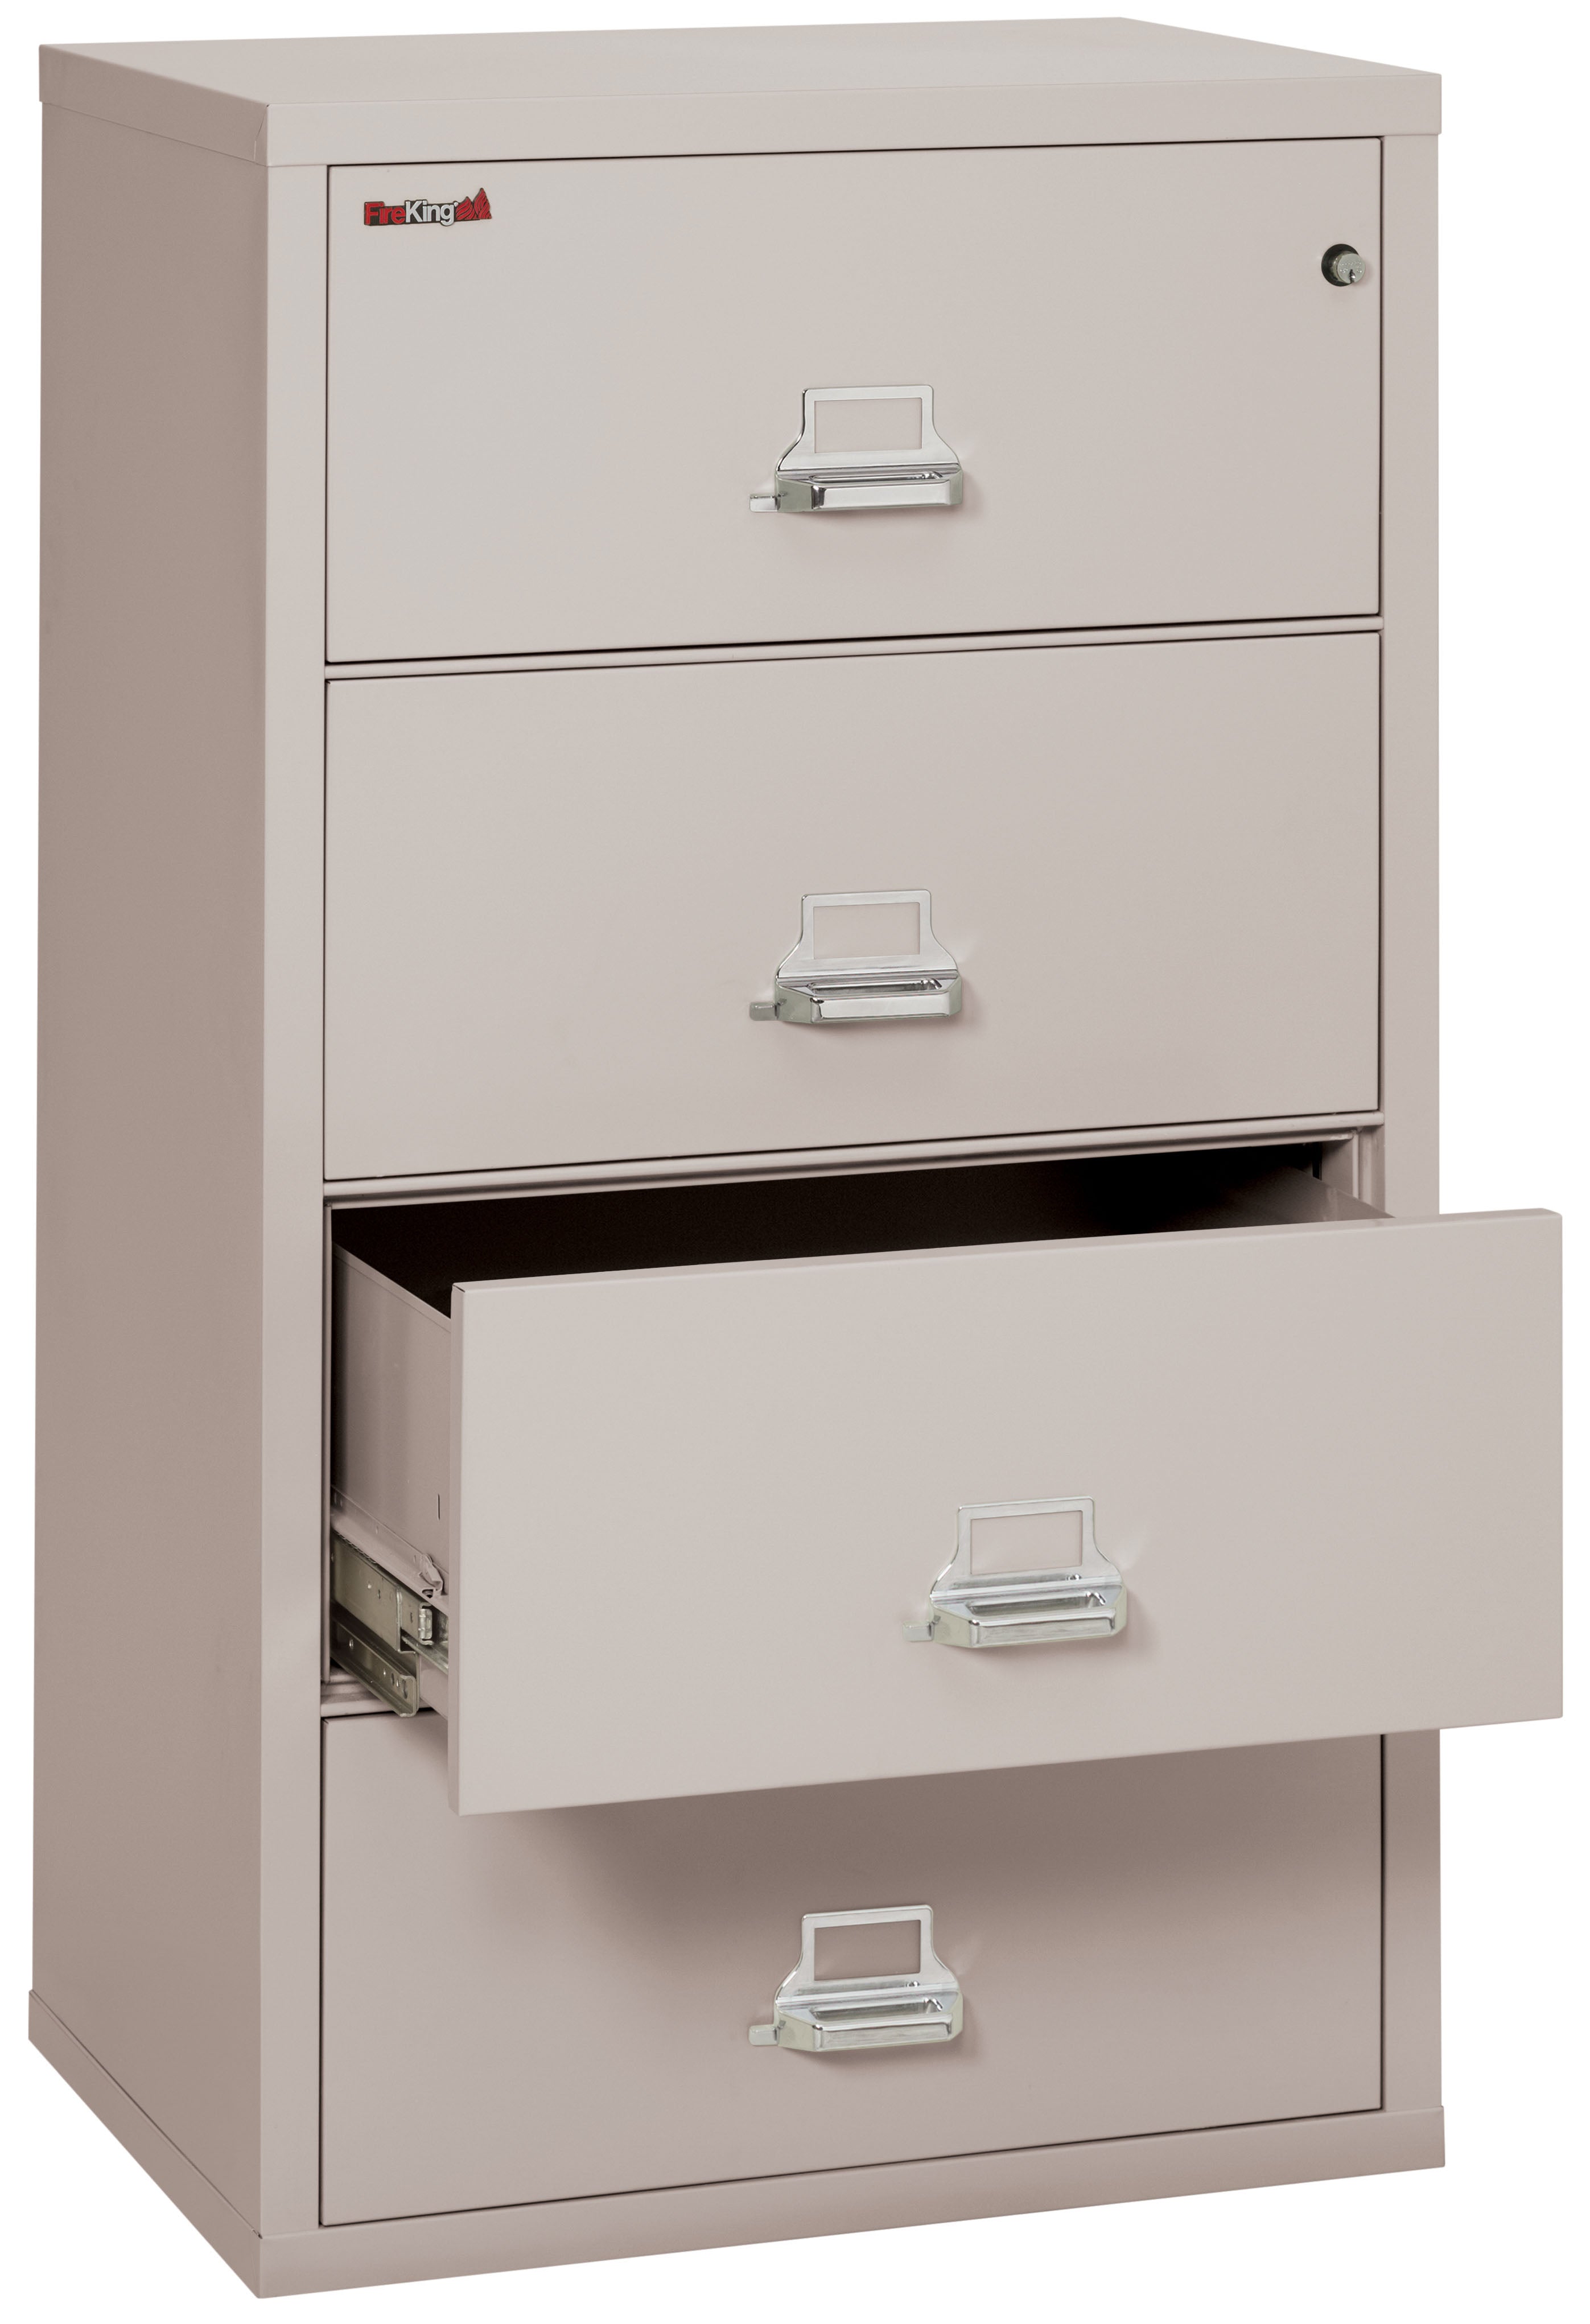 Fire Resistant File Cabinet - 3 Drawer Lateral 31" wide